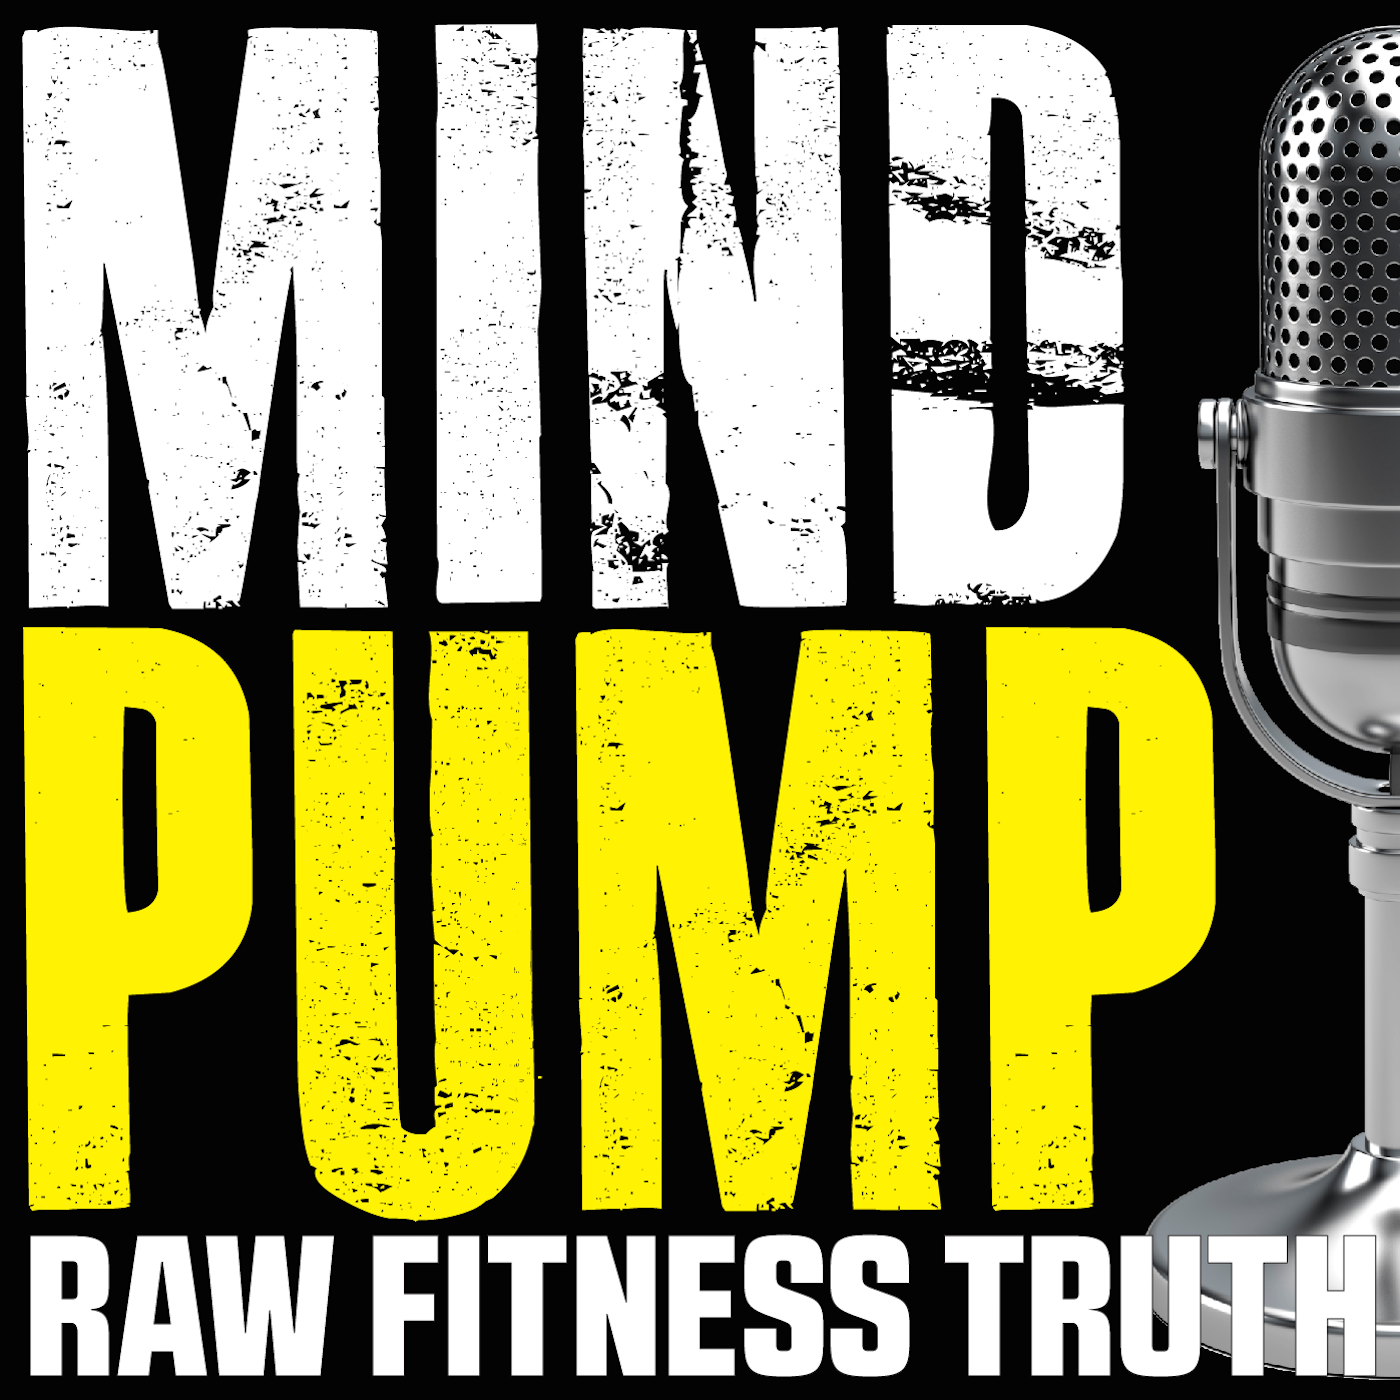 352: Fat Grips, Mouthpieces, Training for Performance AND Aesthetics & MORE